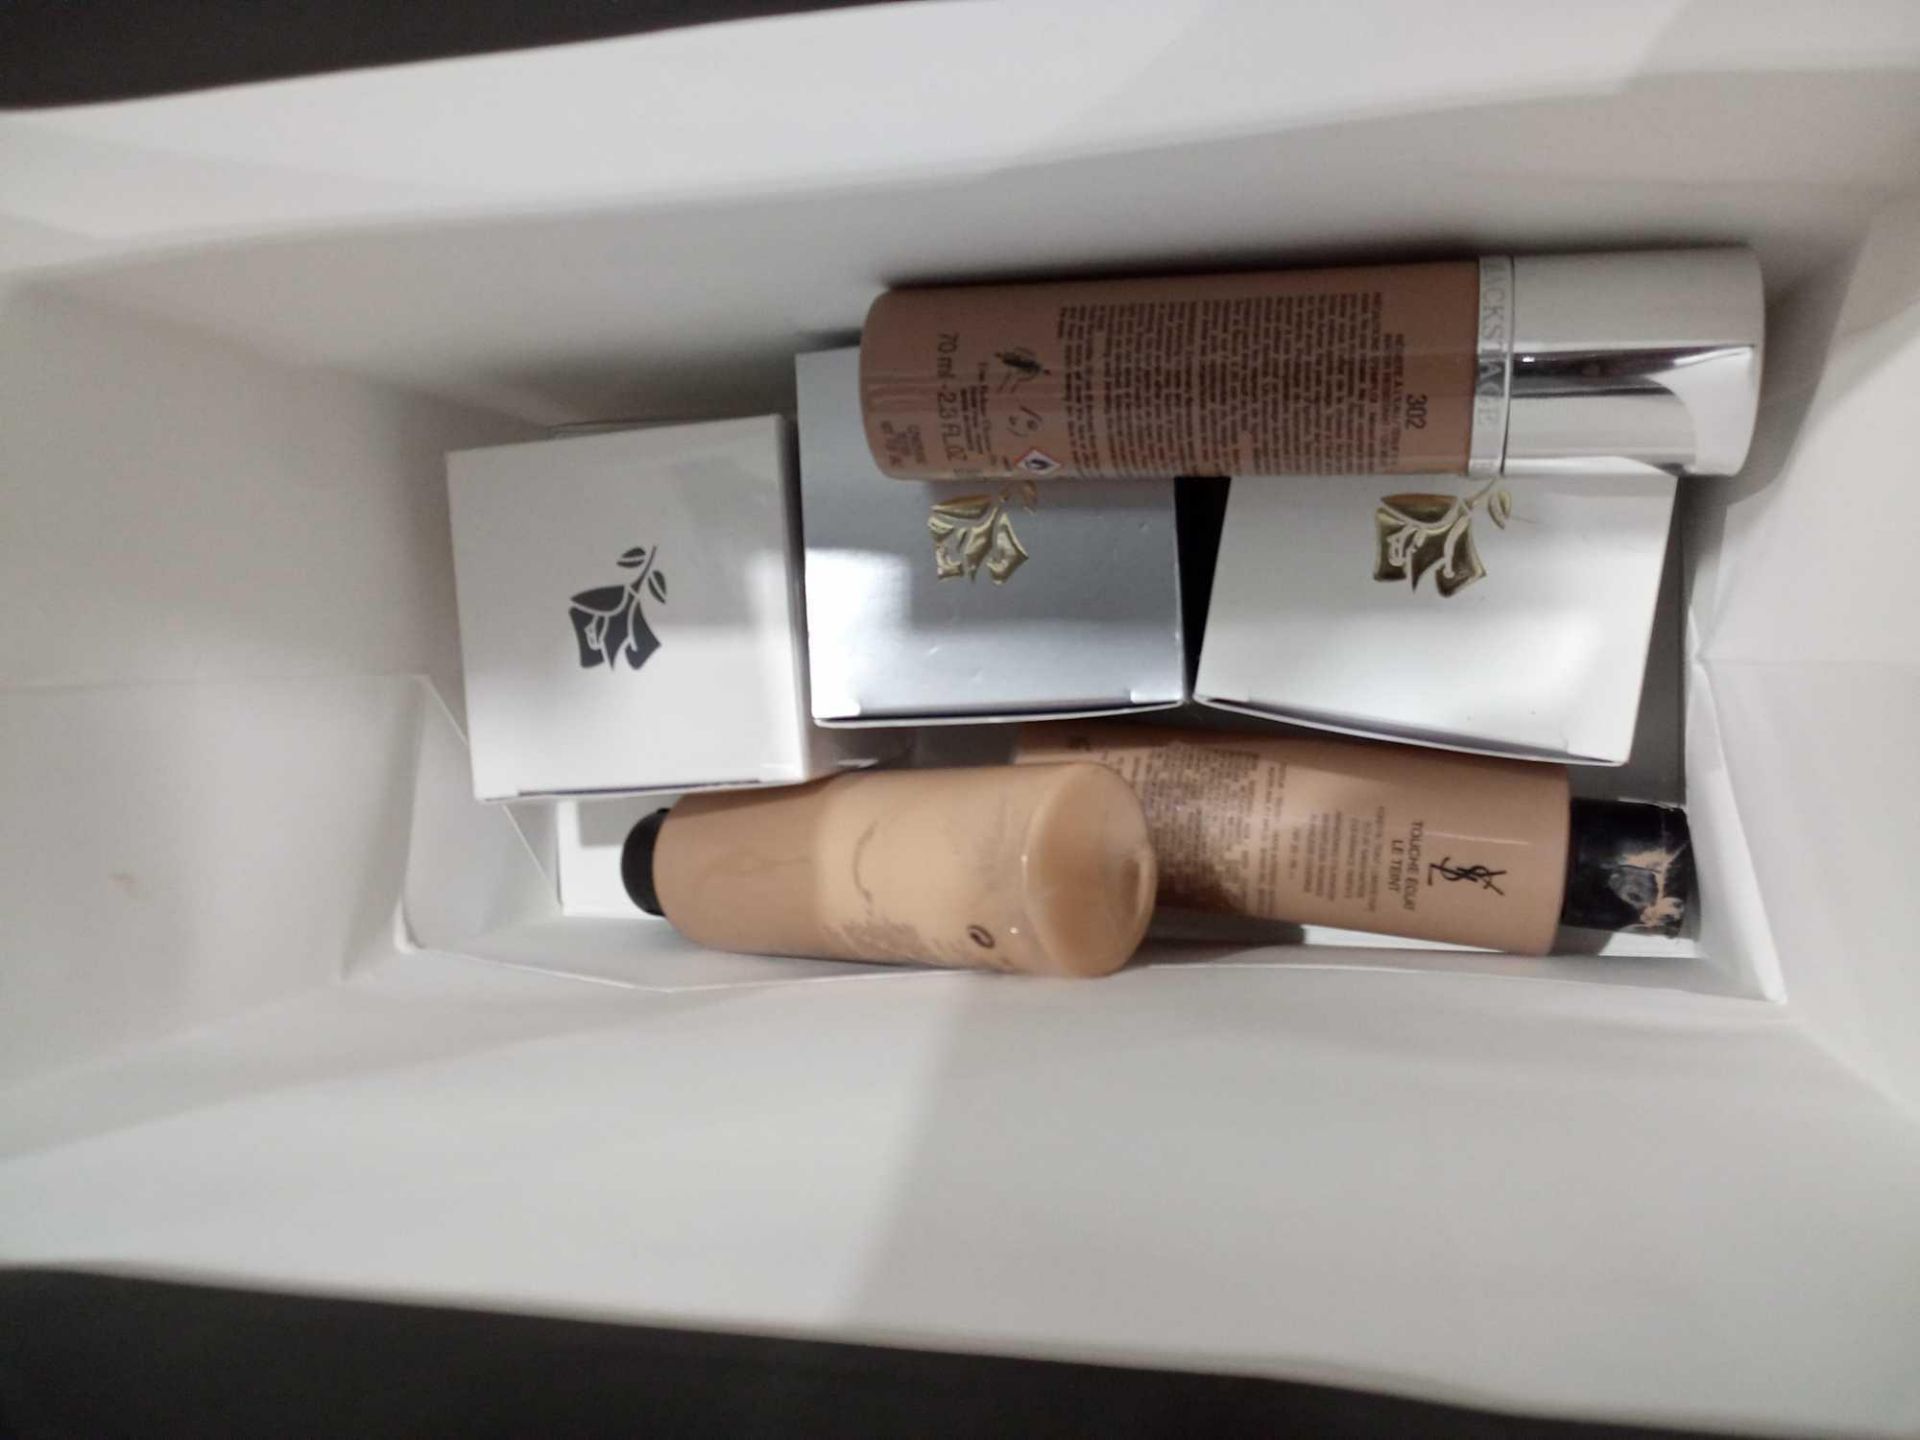 RRP £200 Gucci Gift Bag To Container Sorted Ysl Foundations And Lancome Creams Ex-Display